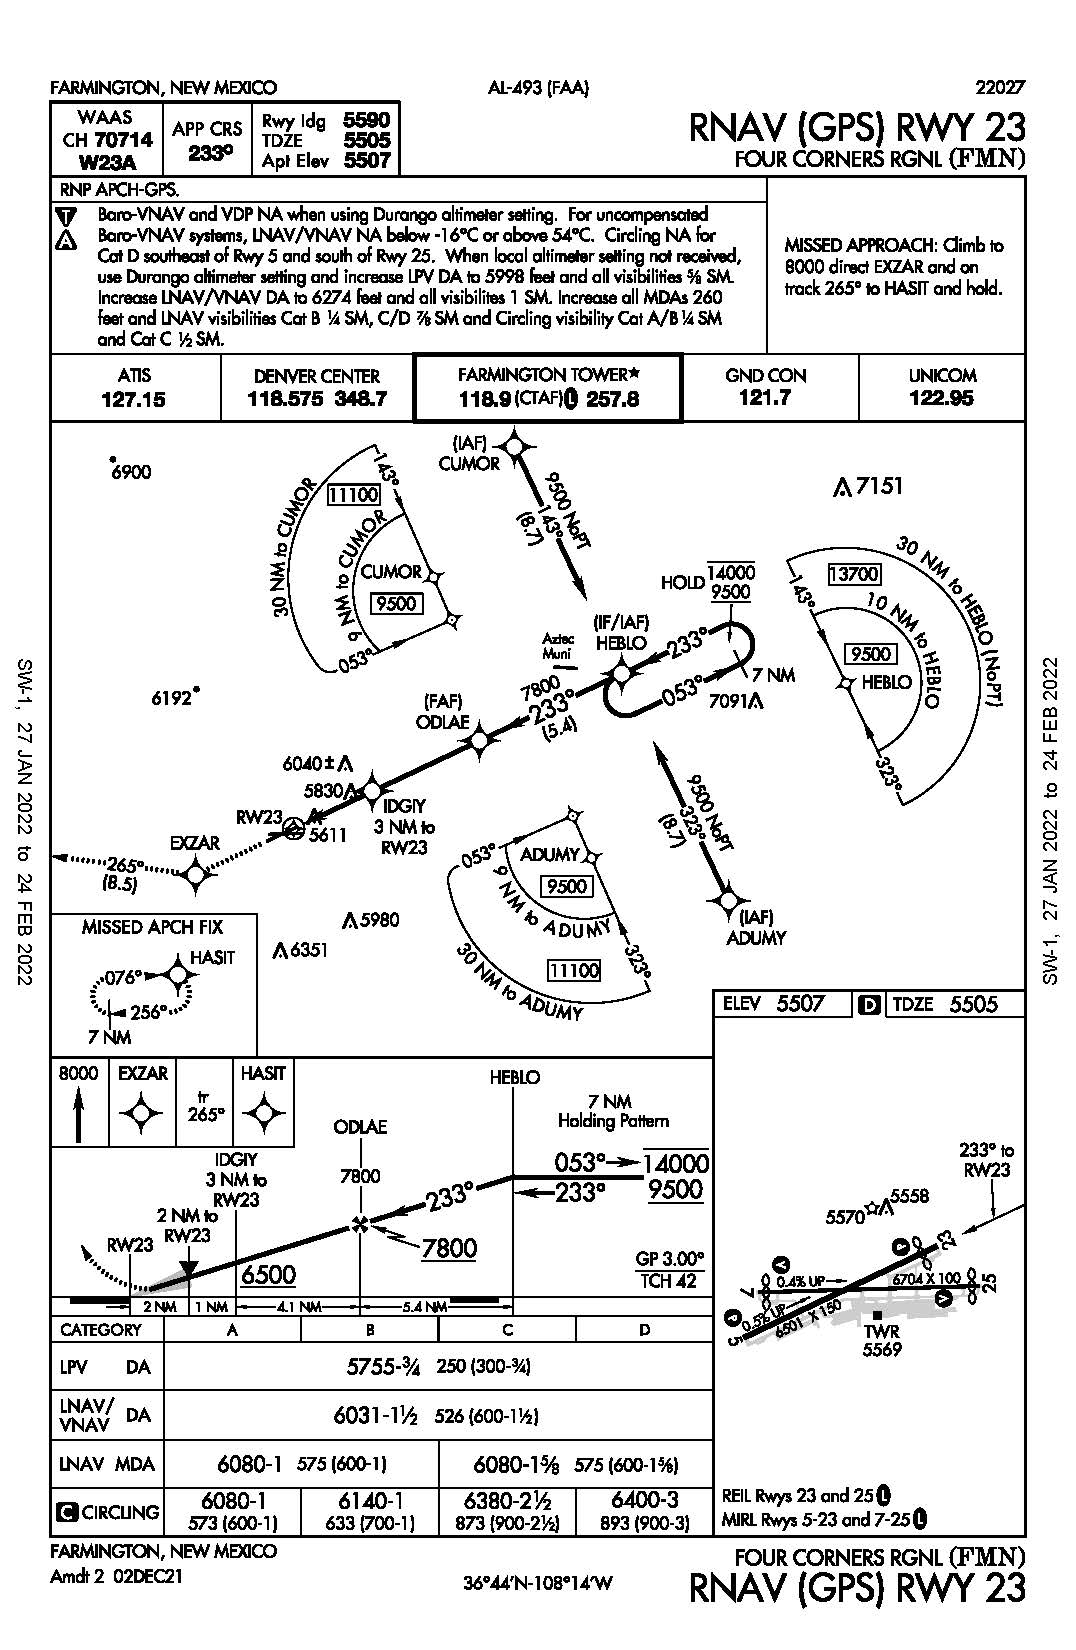 A graphic depicting an RNAV (GPS) approach chart which depicts TAAs using icons located in the plan view outside the depiction of the actual approach procedure.